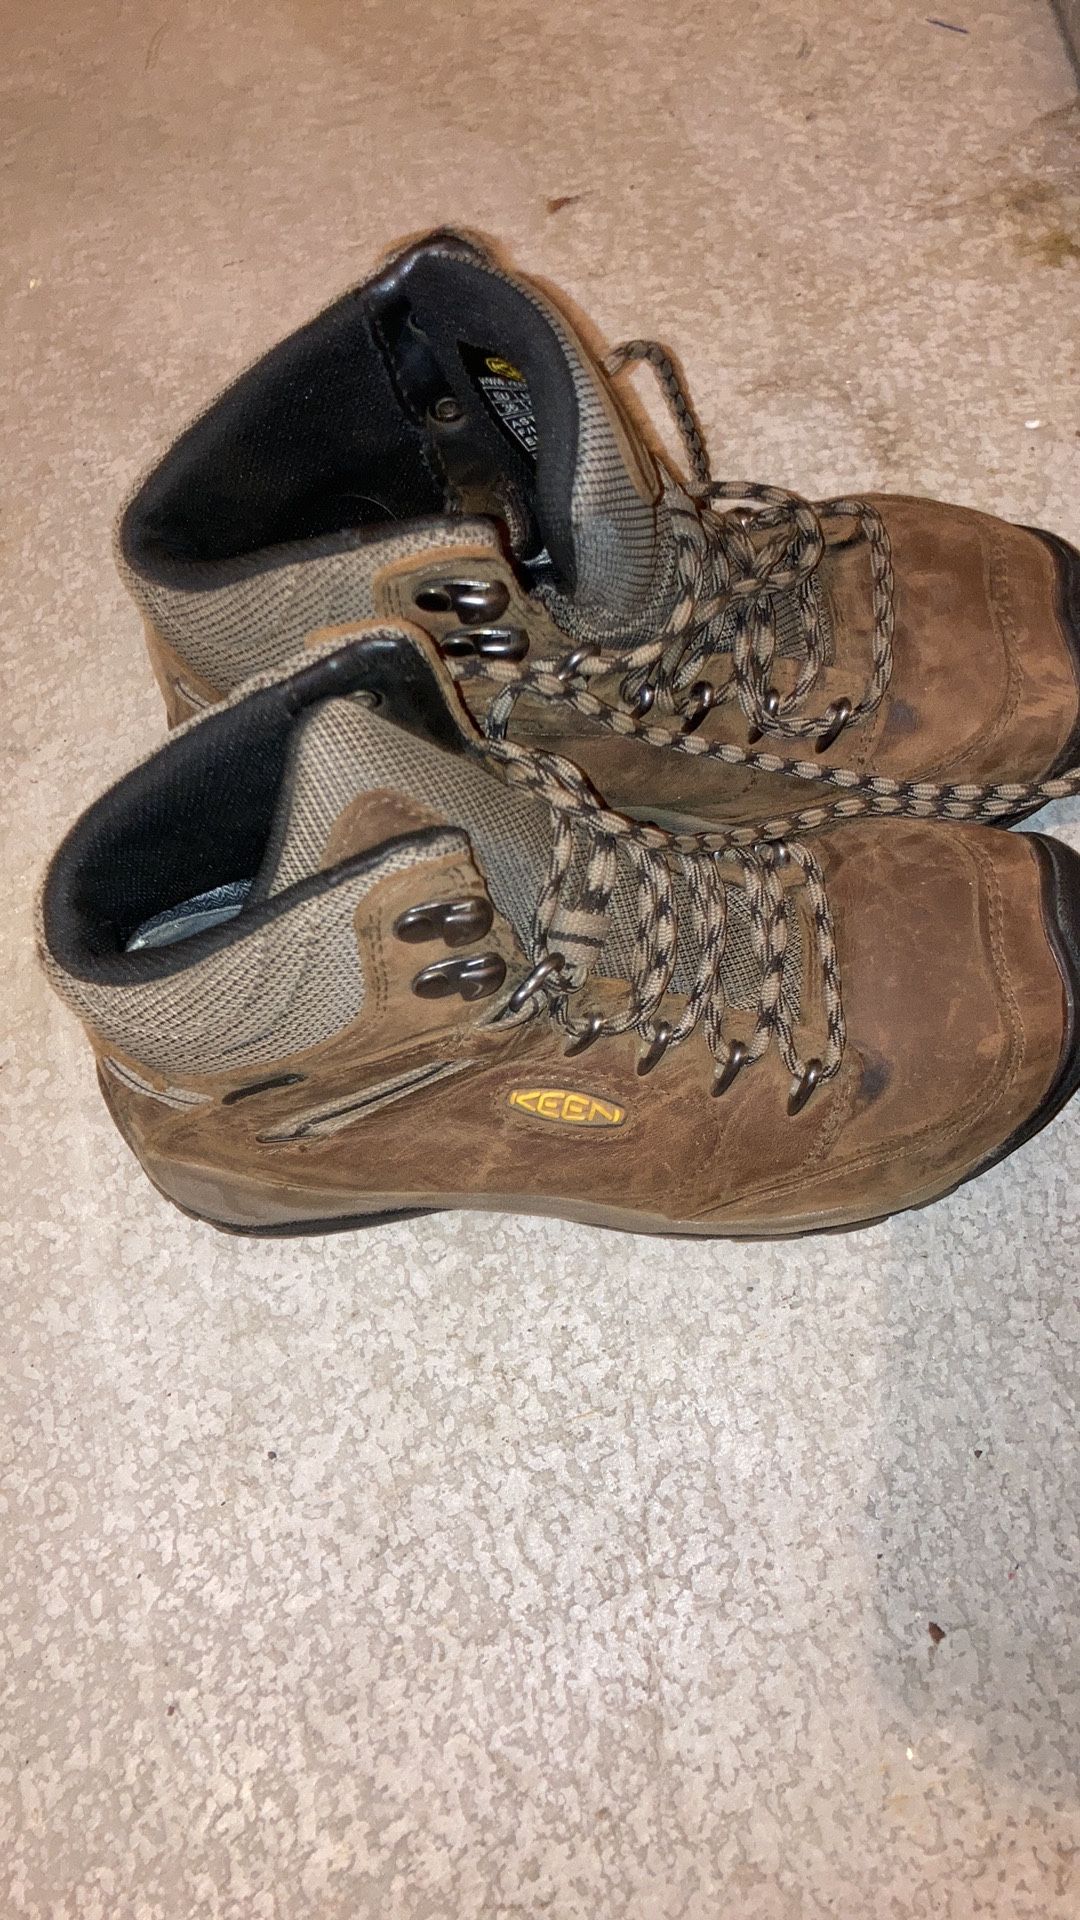 Keen Hiking/Utility Boots